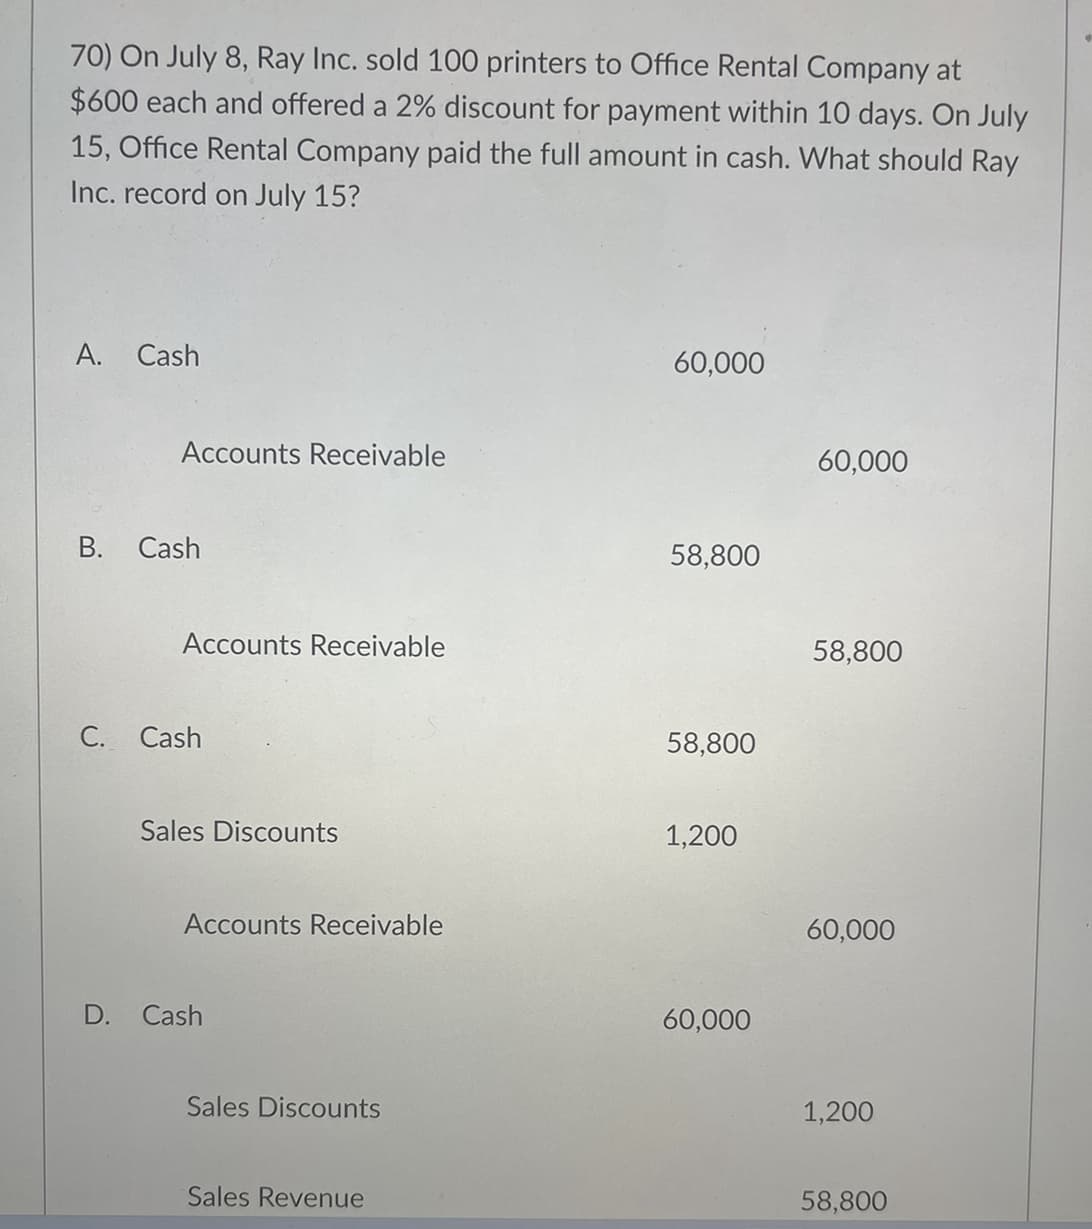 70) On July 8, Ray Inc. sold 100 printers to Office Rental Company at
$600 each and offered a 2% discount for payment within 10 days. On July
15, Office Rental Company paid the full amount in cash. What should Ray
Inc. record on July 15?
A. Cash
B.
C.
Accounts Receivable
Cash
Accounts Receivable
Cash
Sales Discounts
Accounts Receivable
D. Cash
Sales Discounts
Sales Revenue
60,000
58,800
58,800
1,200
60,000
60,000
58,800
60,000
1,200
58,800